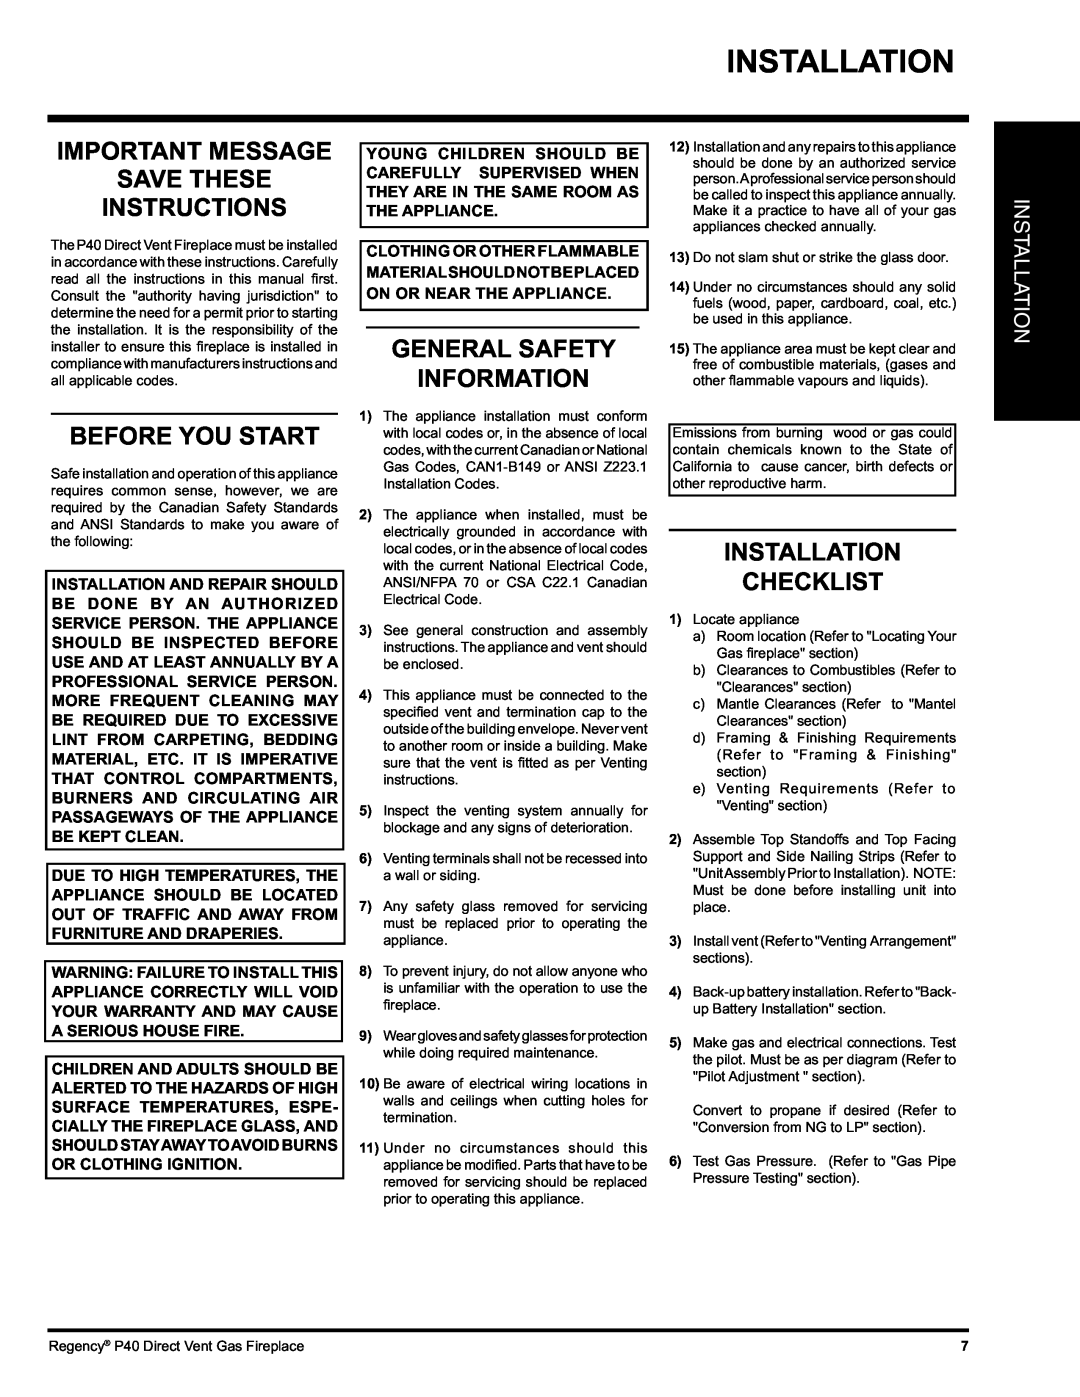 Regency P40-LP Important Message Save These Instructions, Before You Start, General Safety Information, Installation 